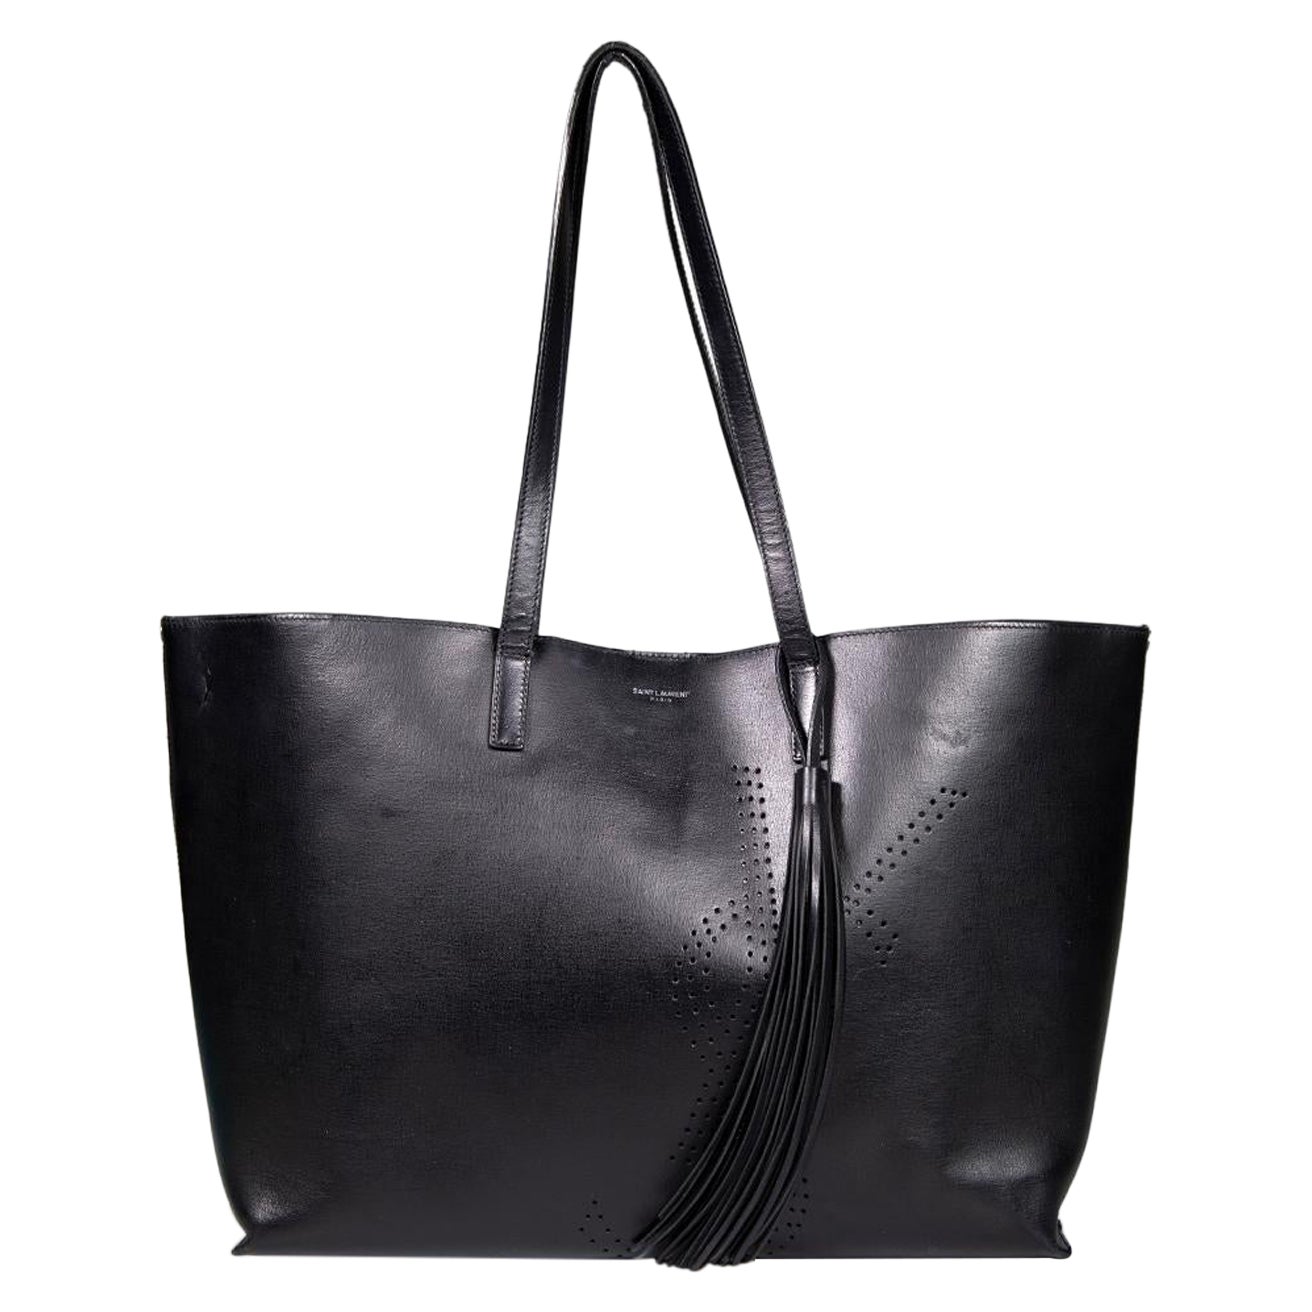 Saint Laurent Black Leather Perforated East West Shopper Tote For Sale